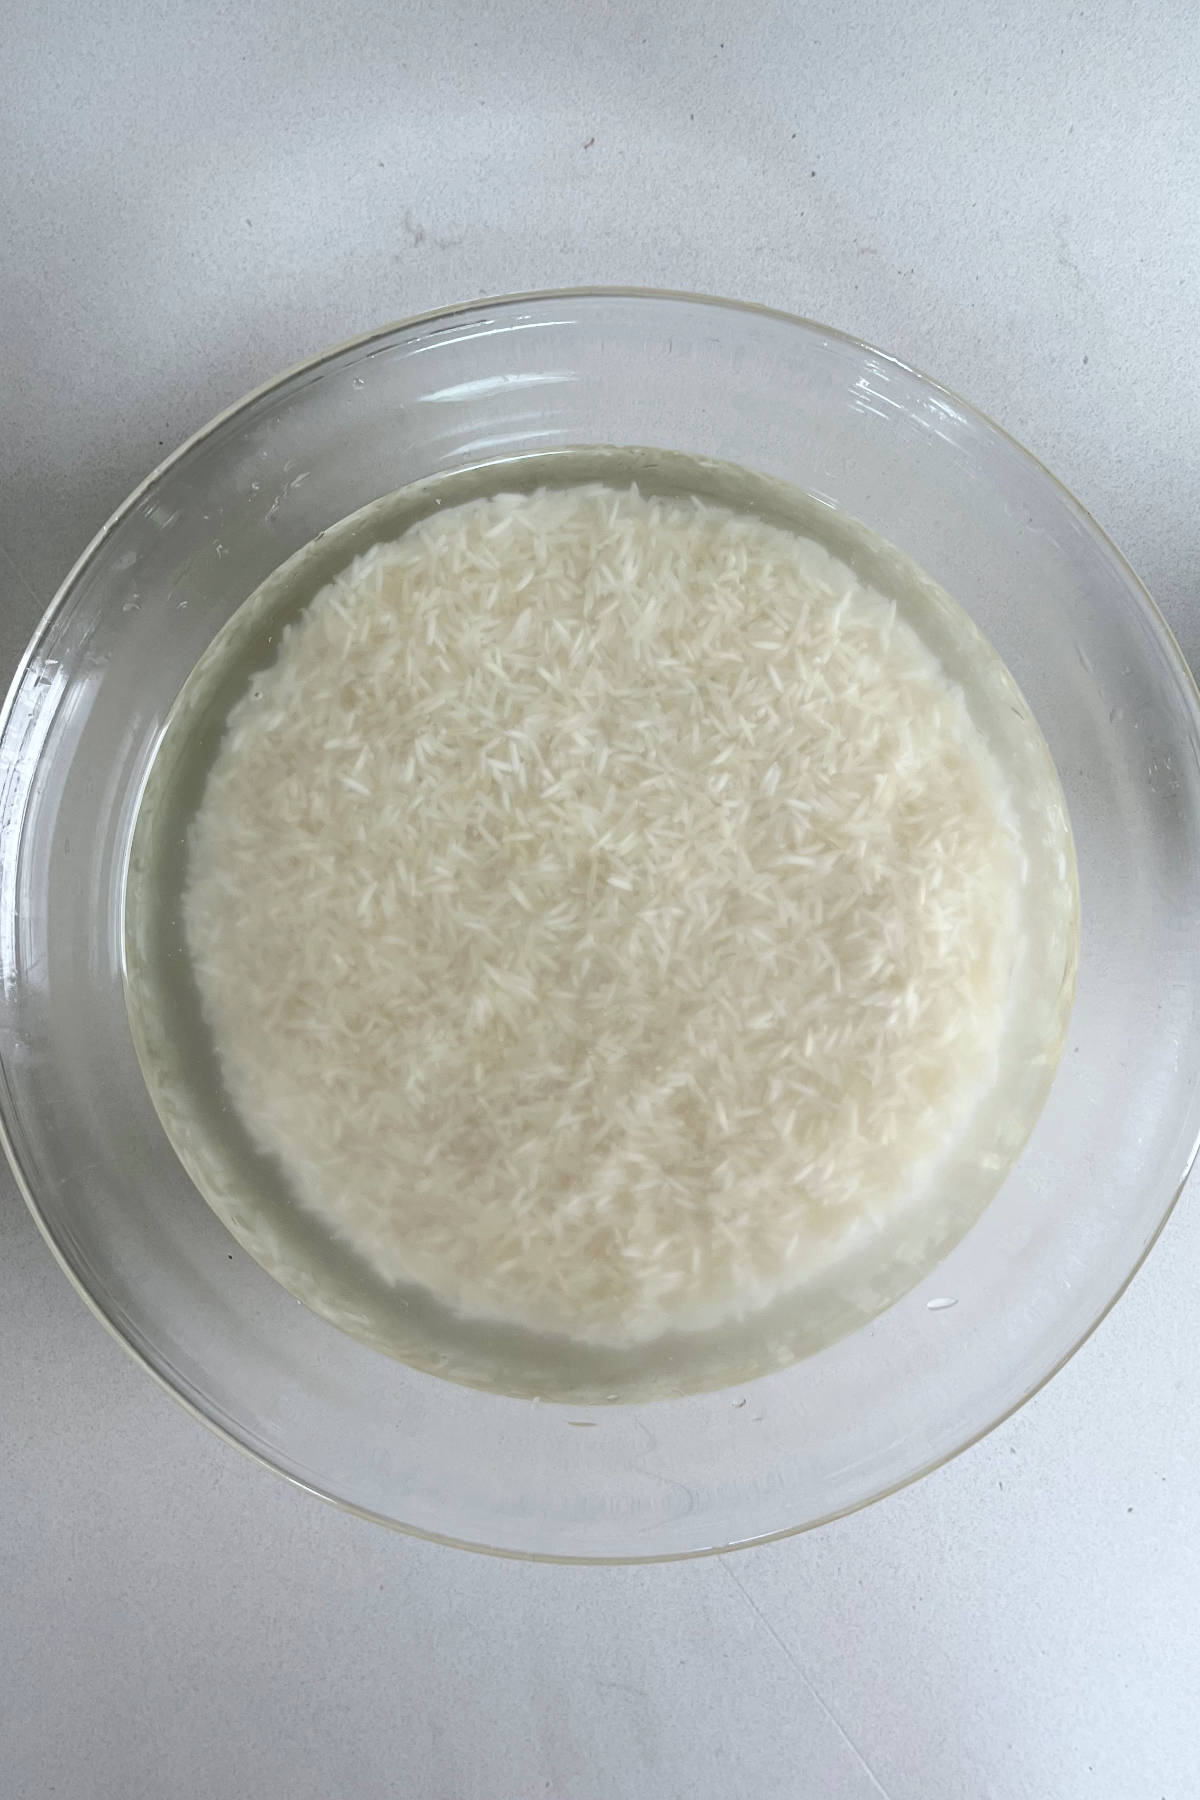 White rice soaking in a clear bowl filled with water.